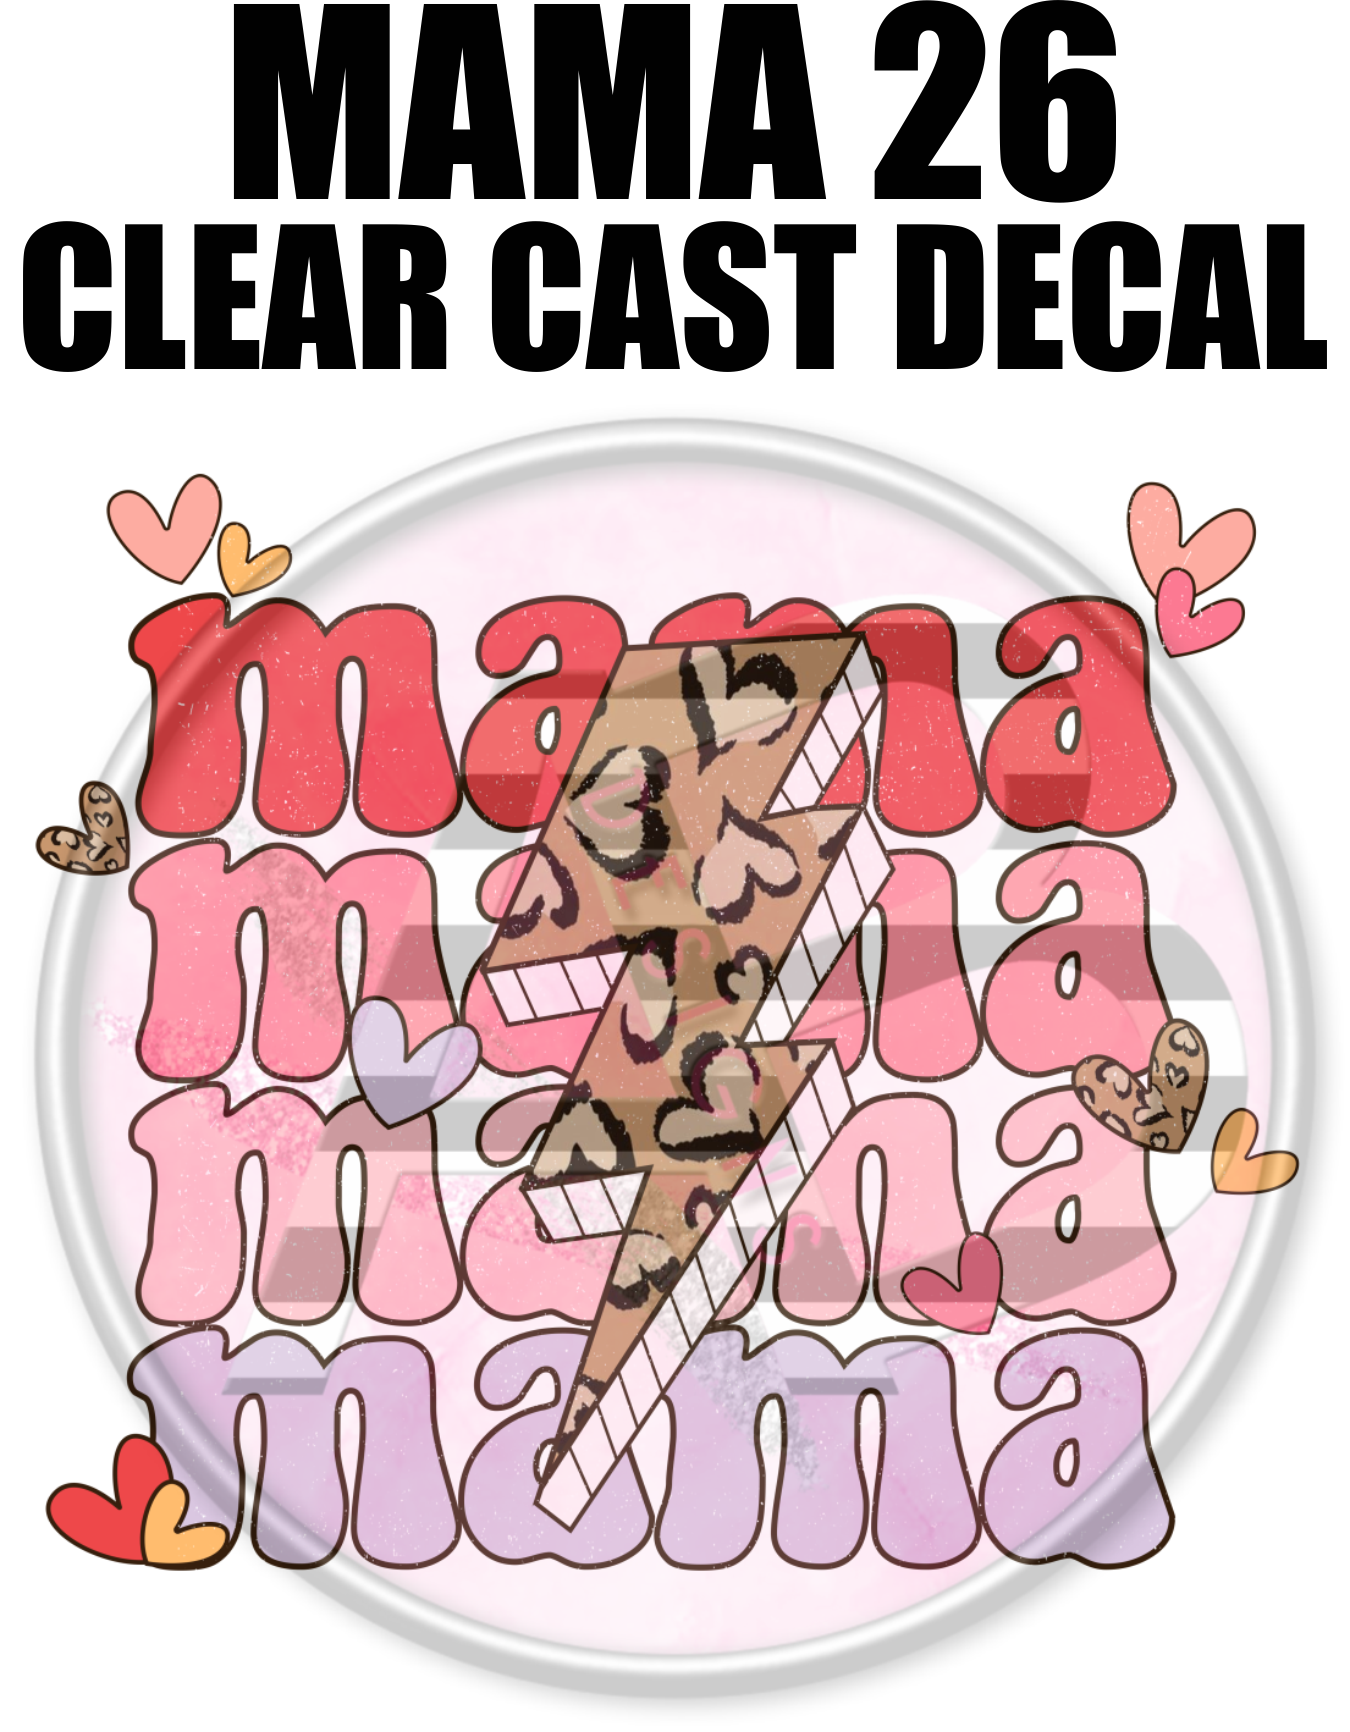 Mama 26 - Clear Cast Decal-551